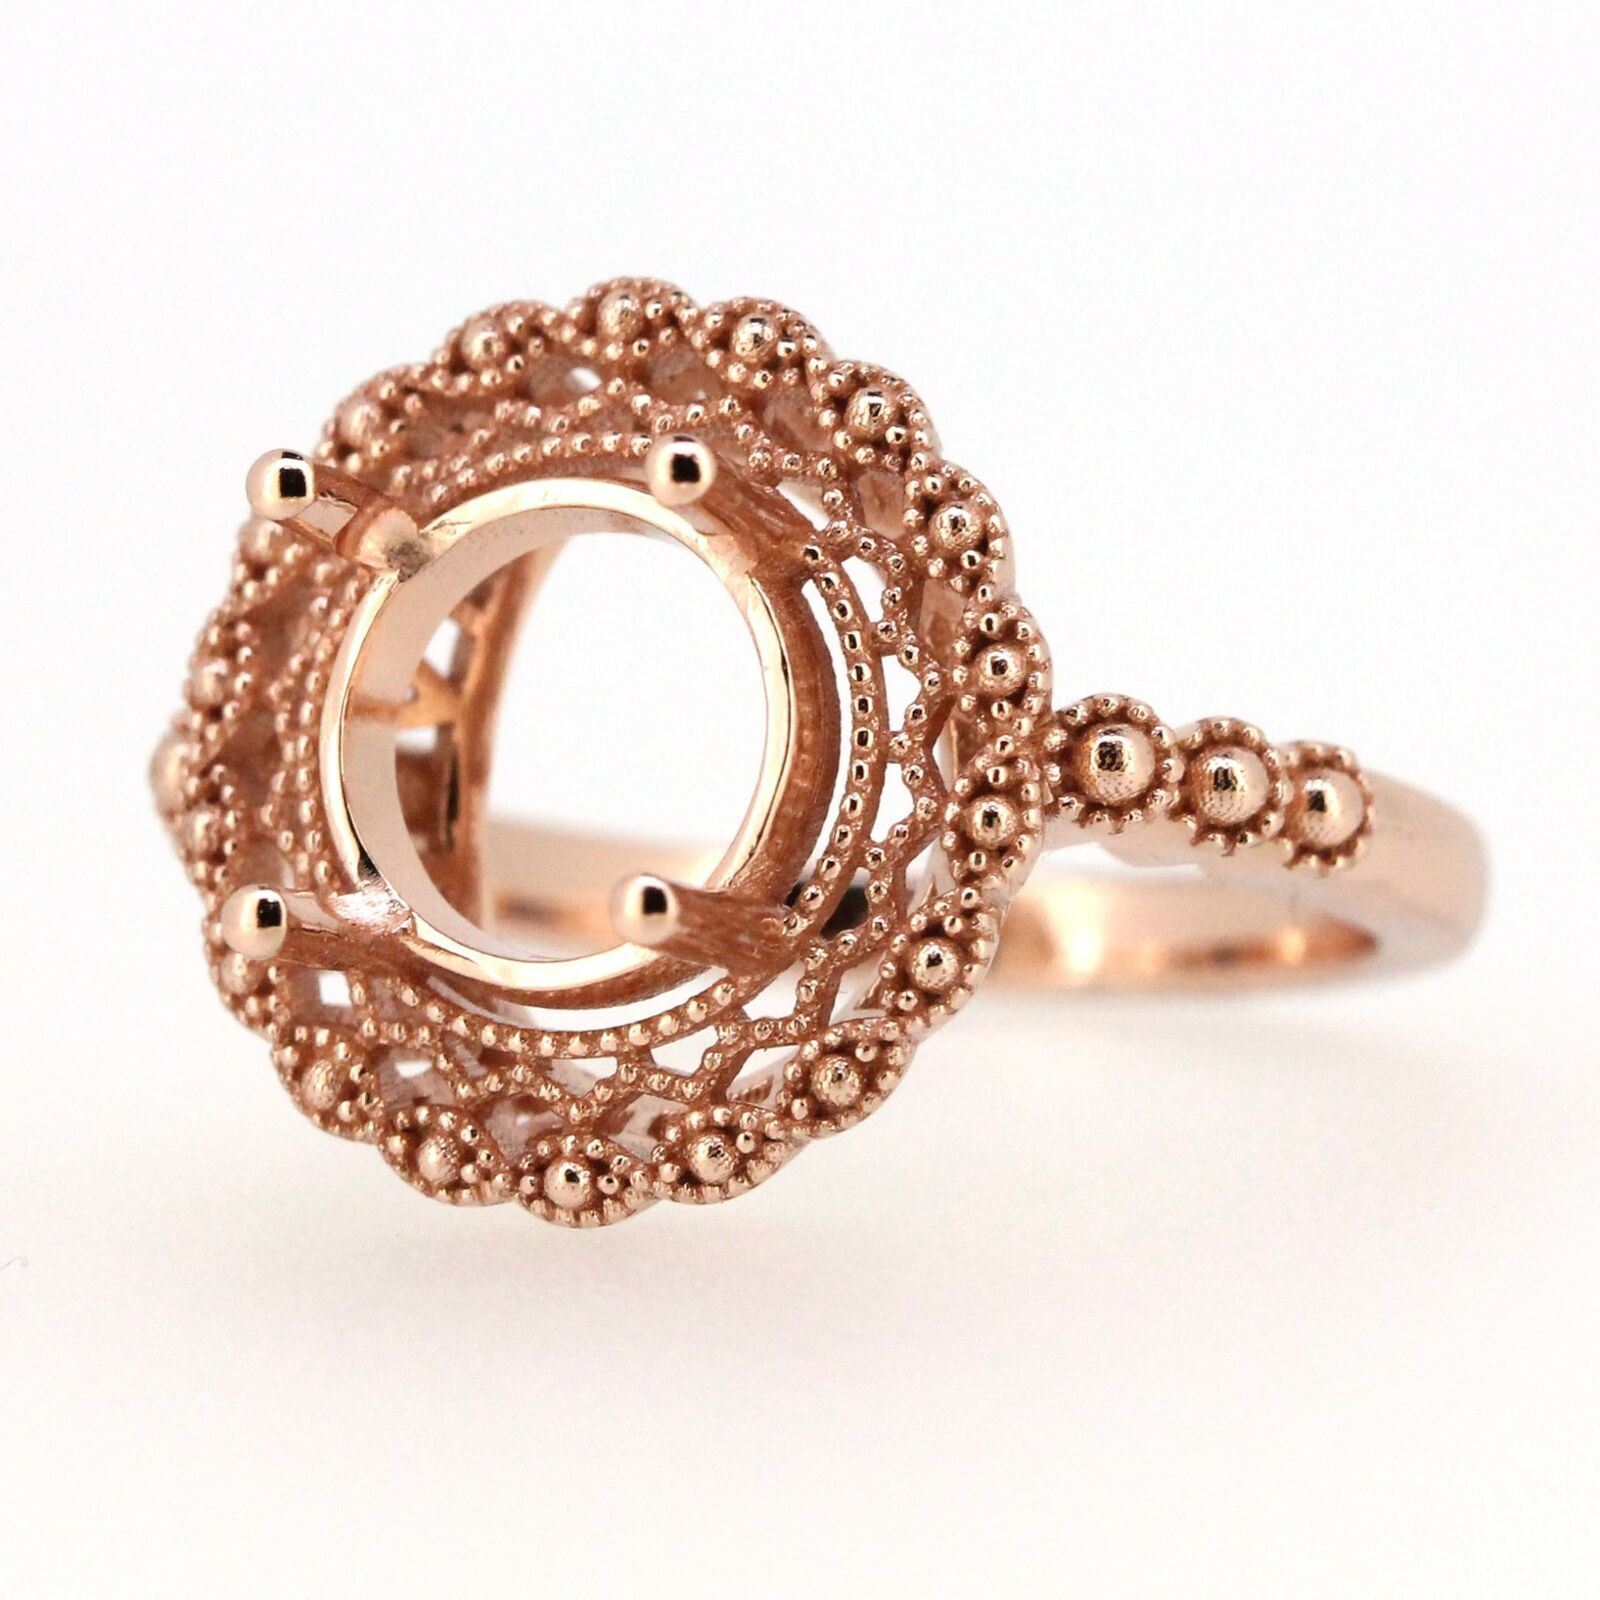 Art Deco Style 14K Rose Gold Semi Mount Ring Setting Round RD 9x9mm